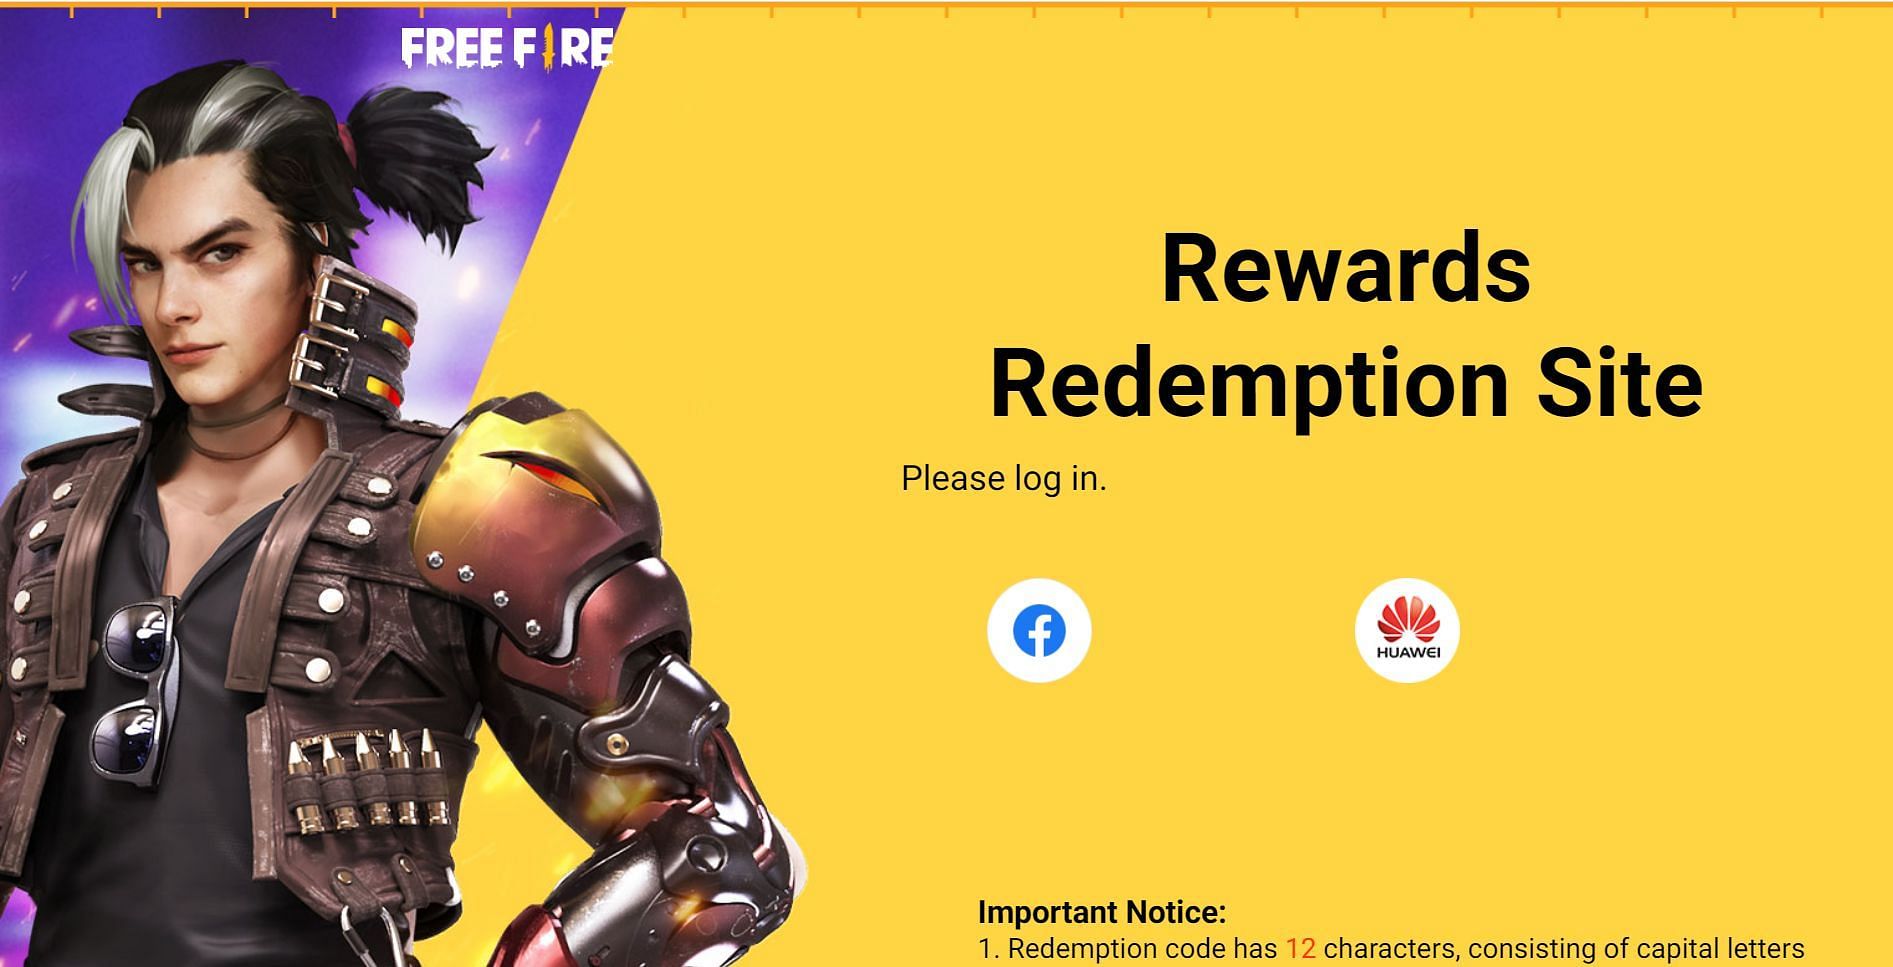 Rewards Redemption Site can be used for using redeem codes (Image via Garena)